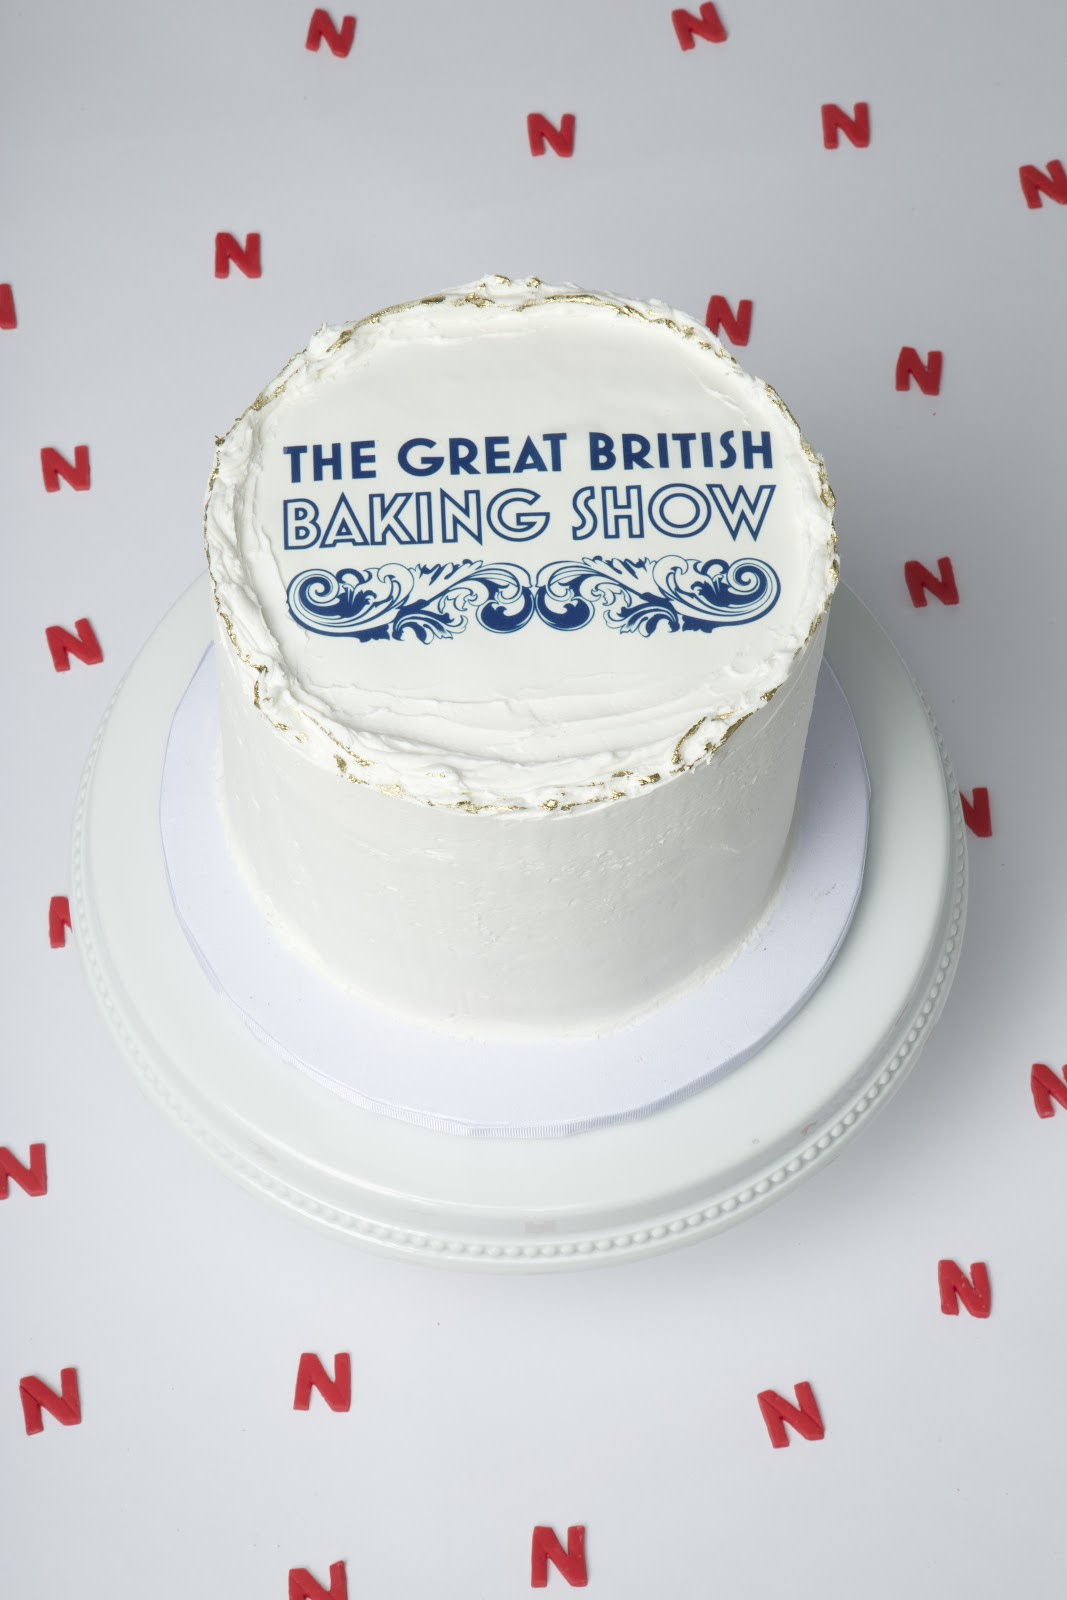 A Netflix Original recipe for freshly baked episodes of The Great British Baking Show